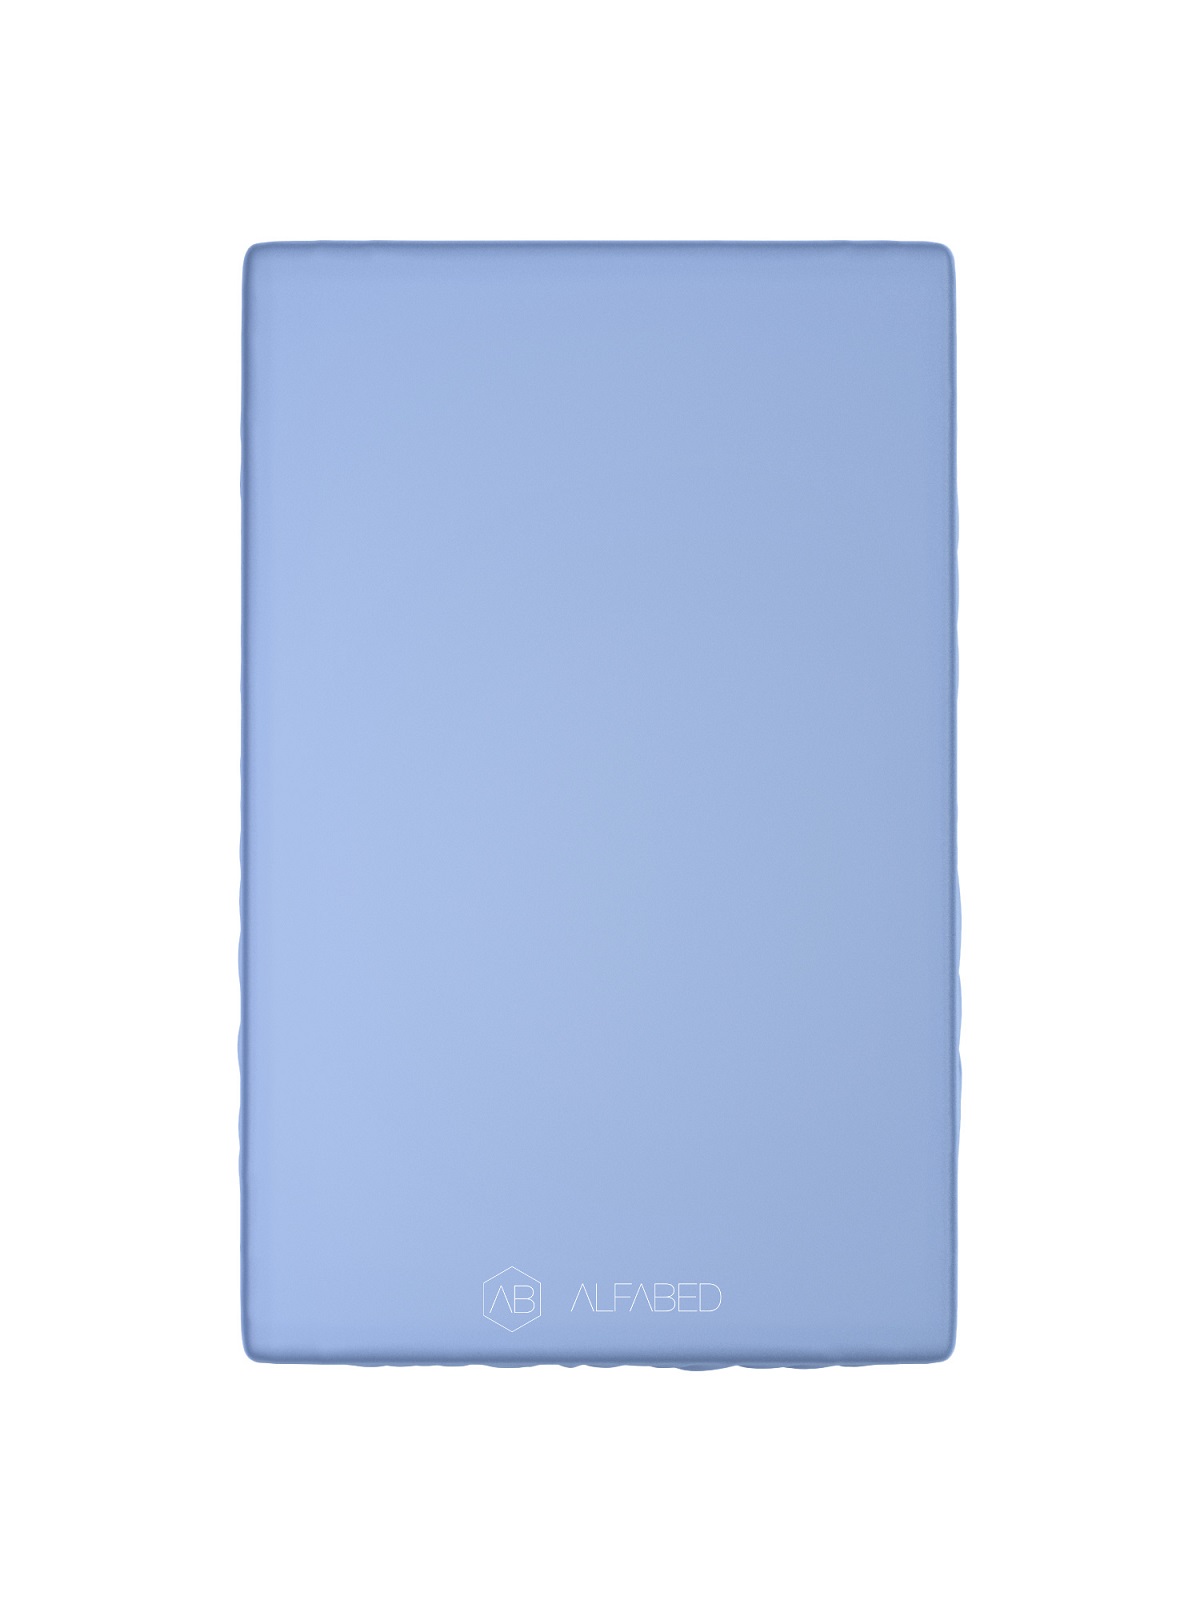 Pillow Top Fitted Sheet Royal Cotton Sateen Bright Blue H-10